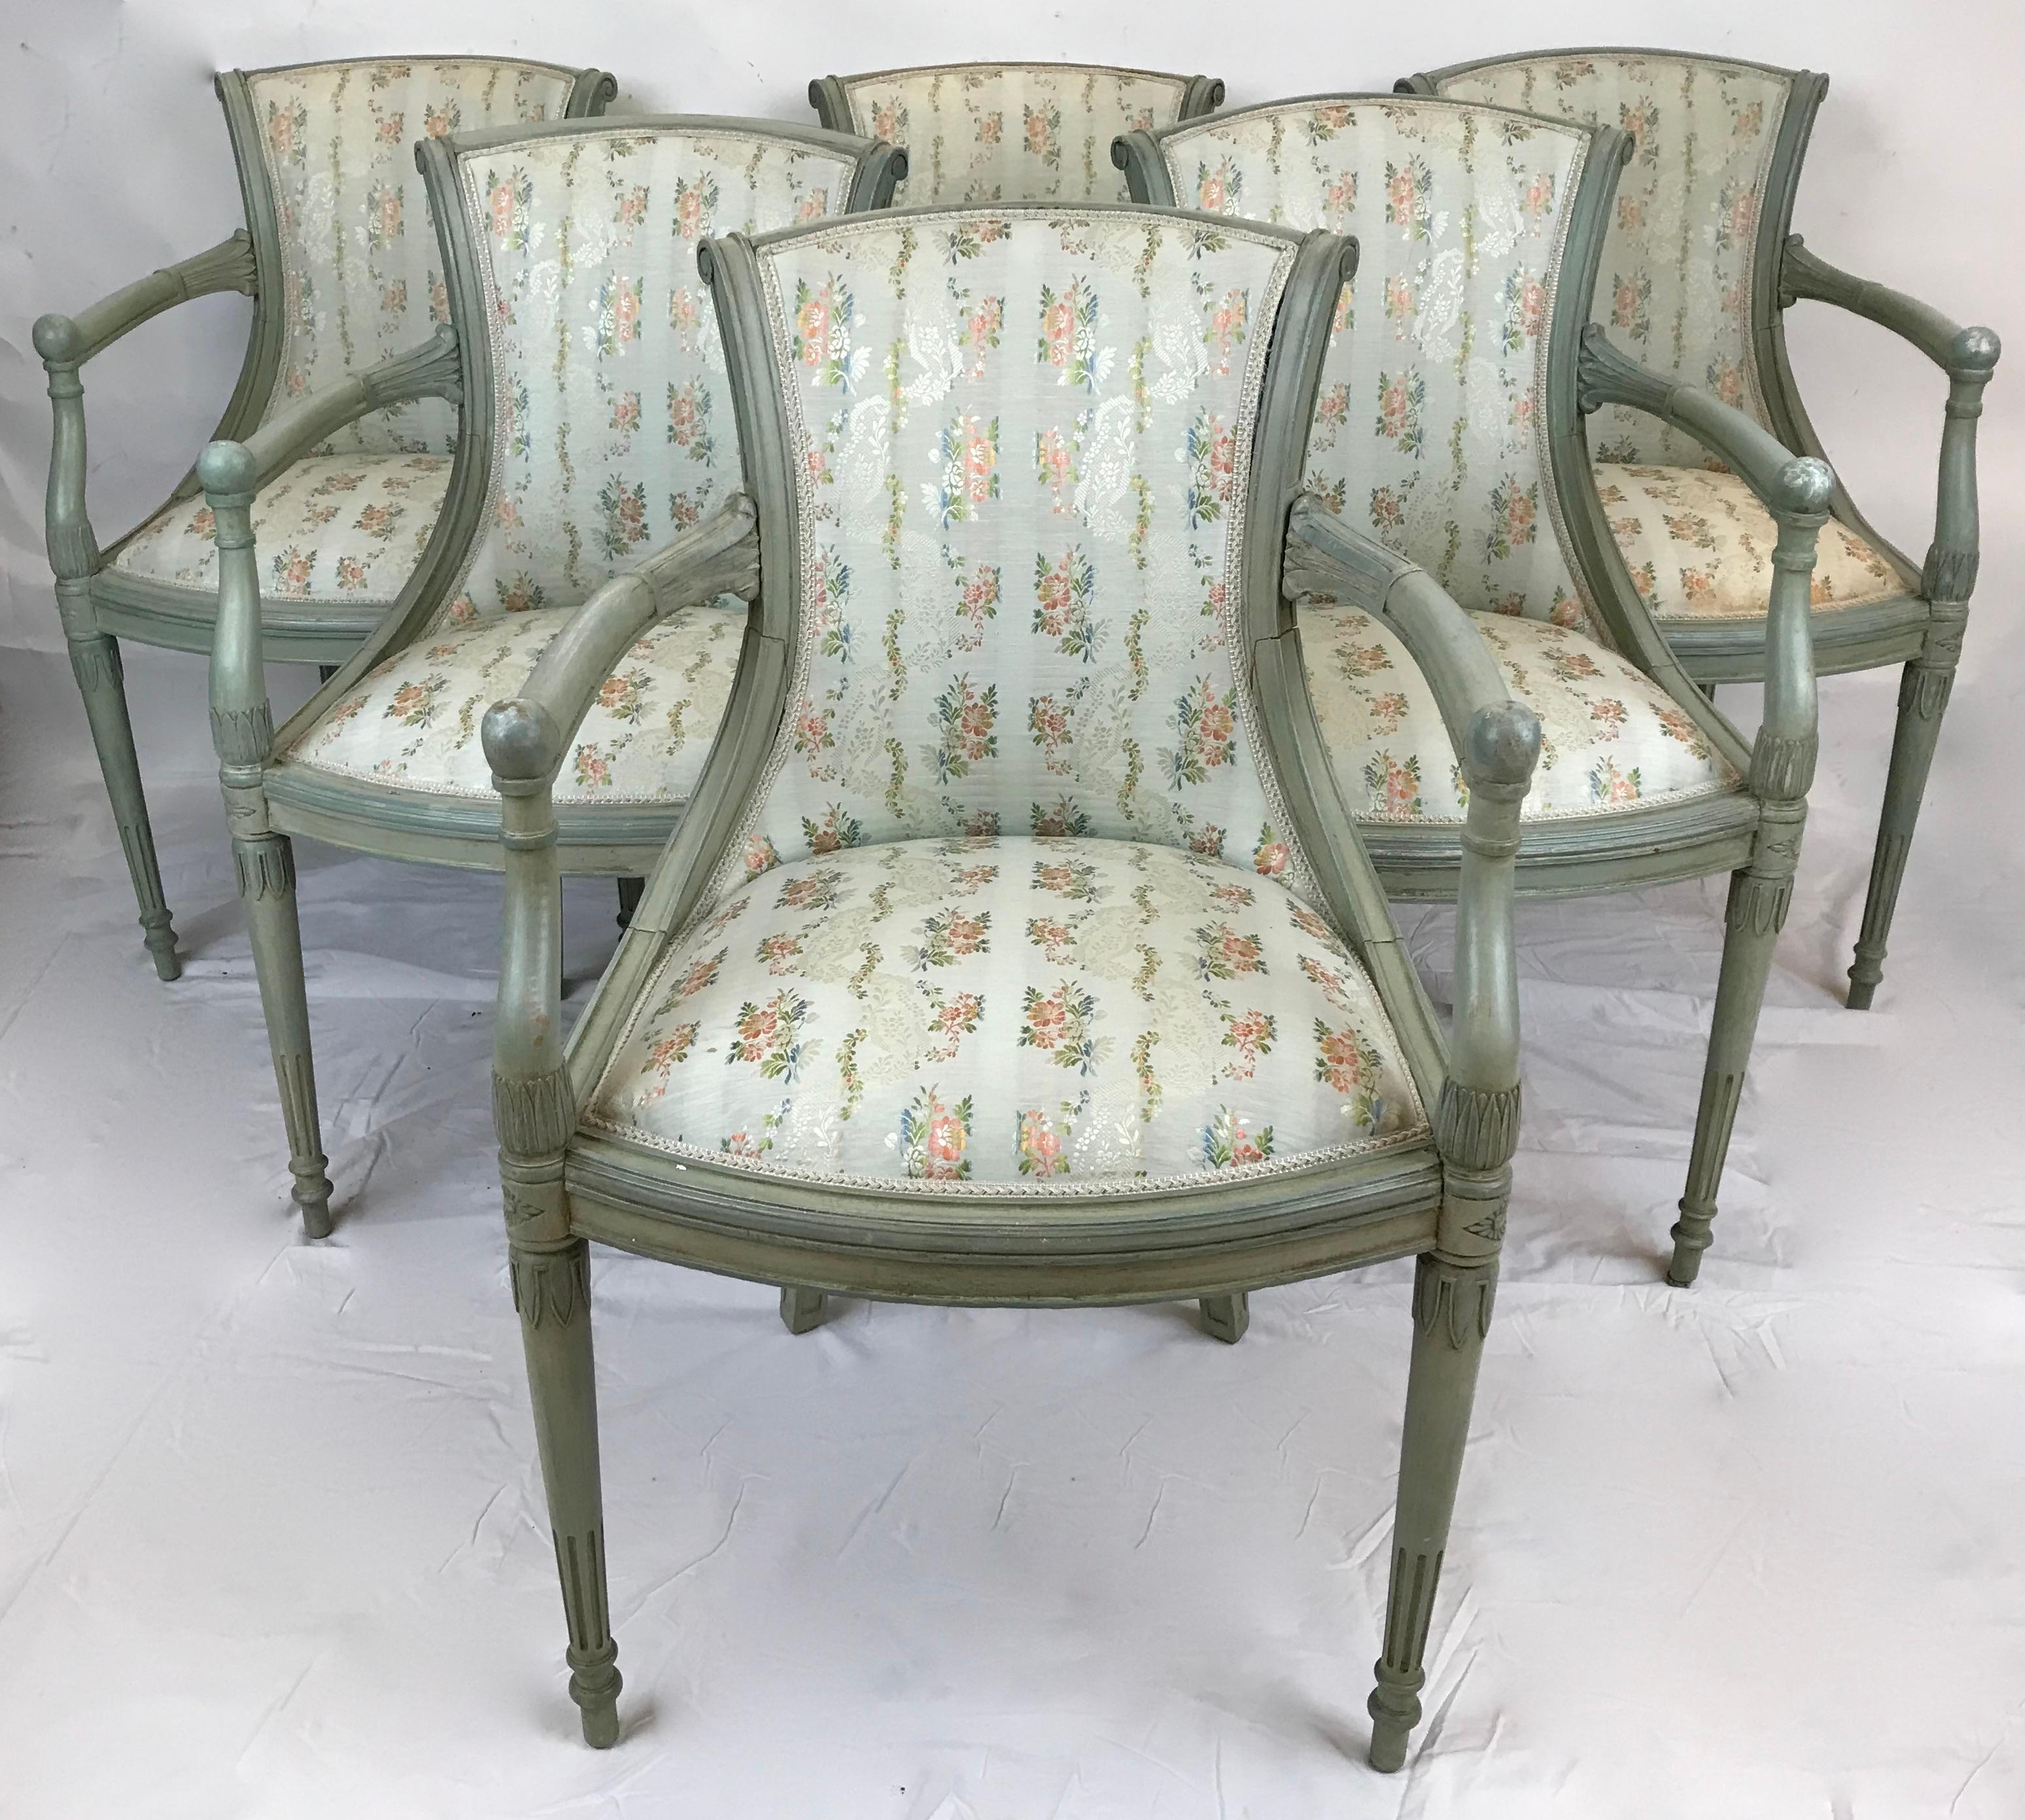 This charming set of six painted Neo-Classical style chairs feature leaf carvings and tapering fluted legs.